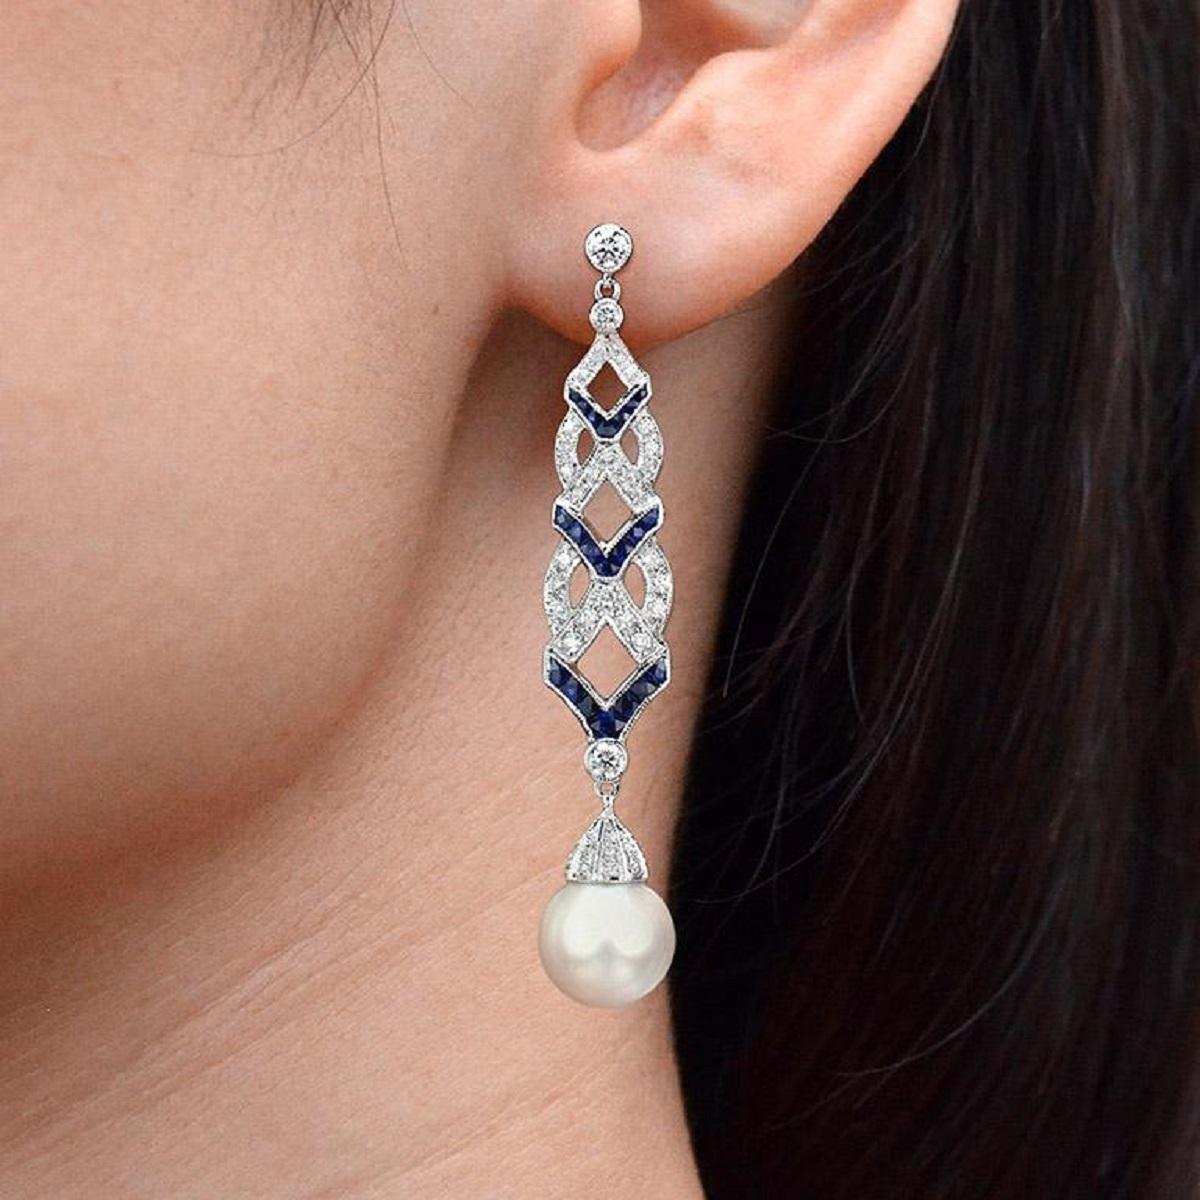 Stand out from the crowd with these lovely Art-Deco-inspired earrings. Each suspending a drop of South Sea Pearl with a diamond-set cap, below articulated lines of diamond and sapphire. 

Information
Style: Art-deco
Metal: 18K White Gold
Width: 10